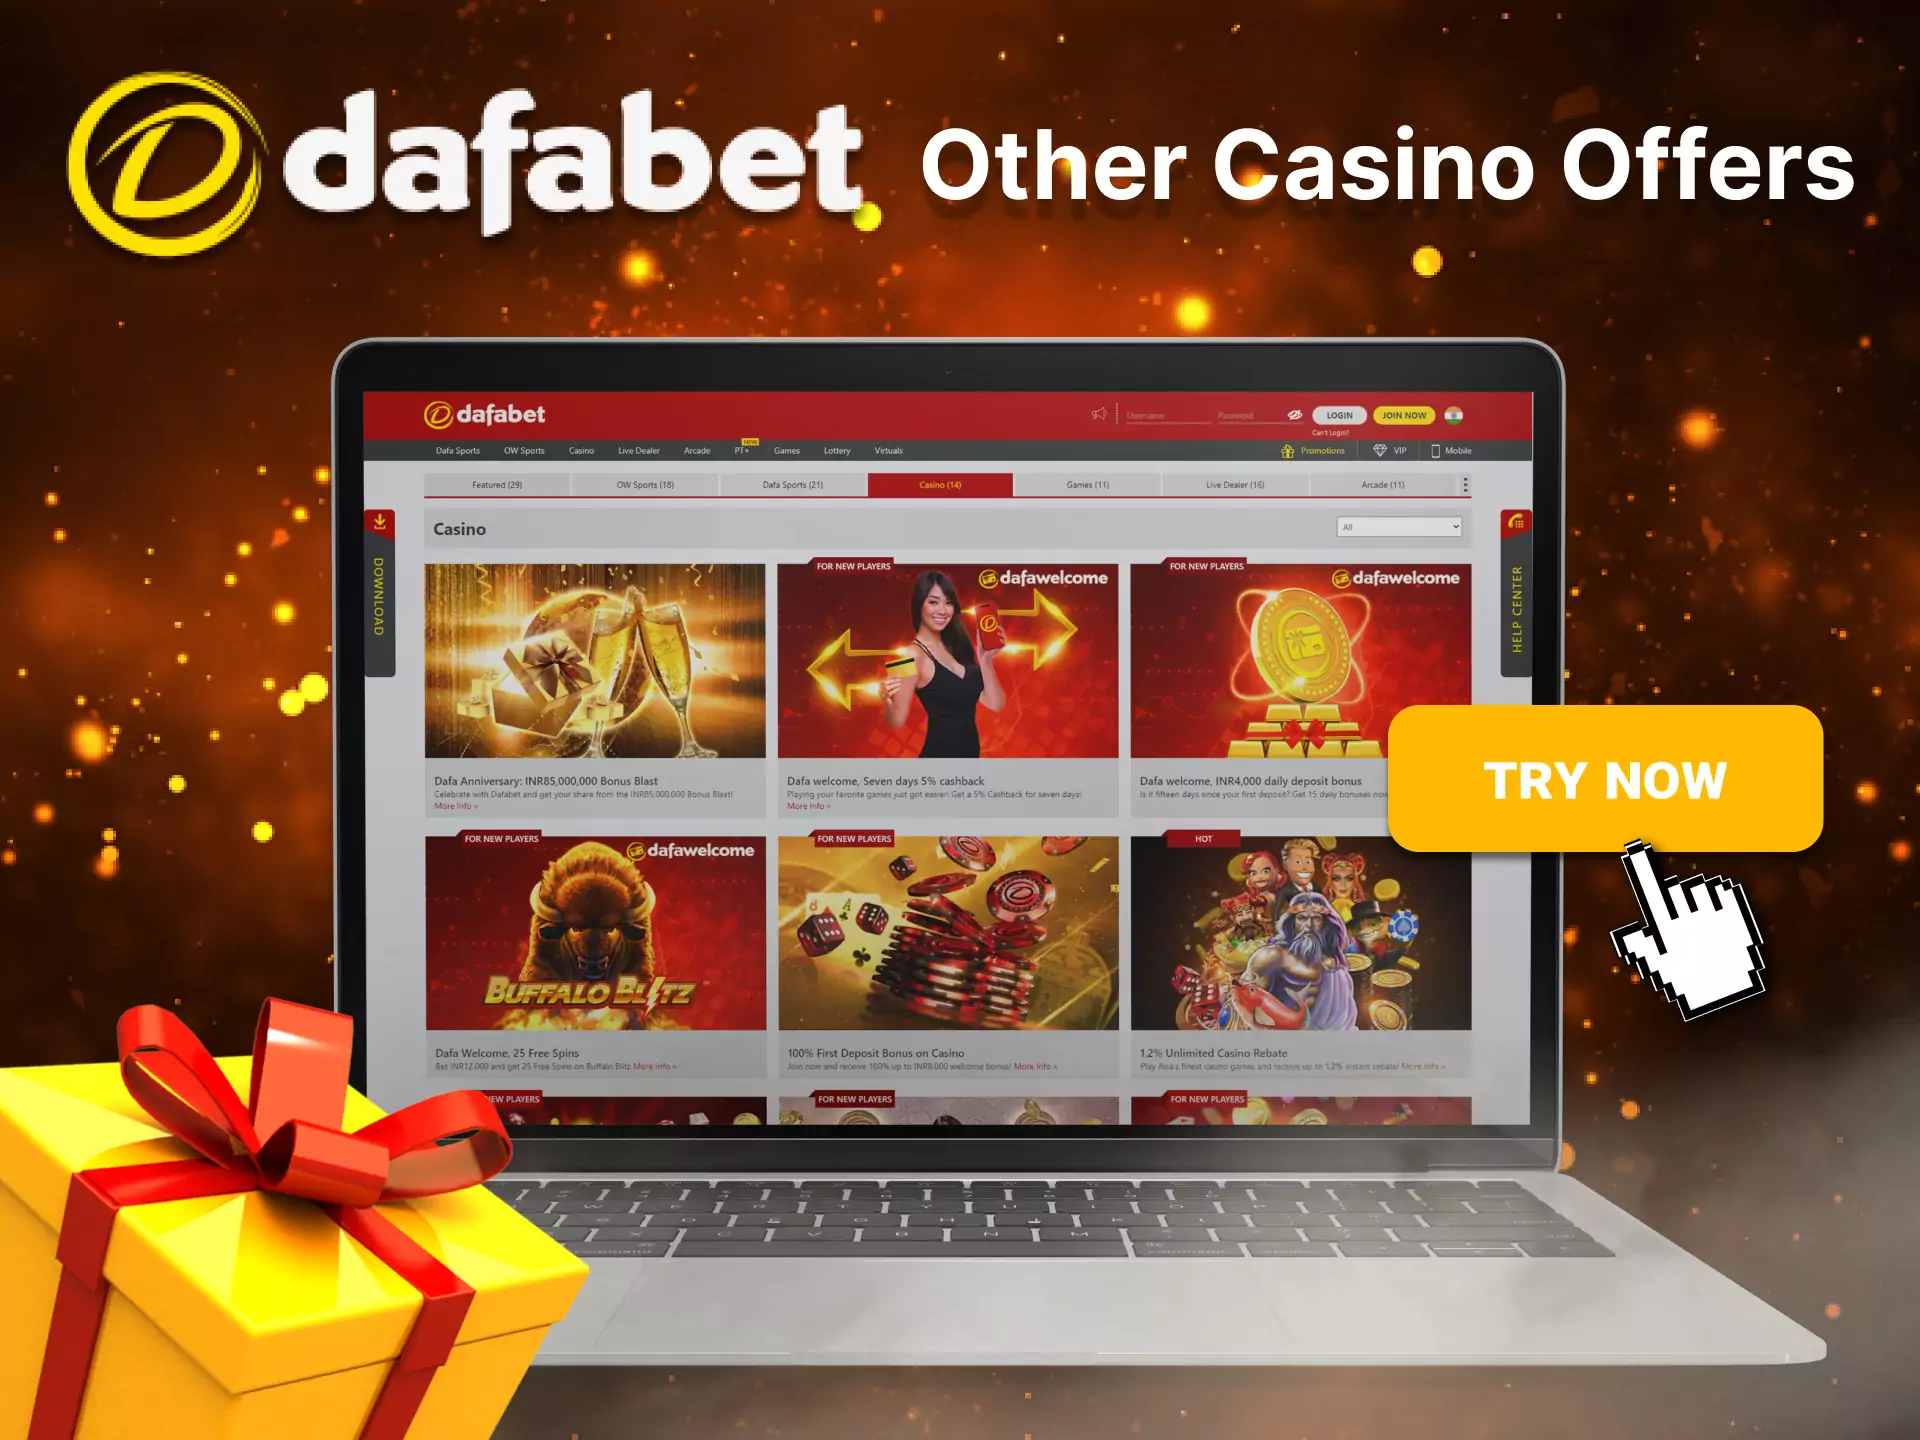 Try all the offers and bonuses from Dafabet.